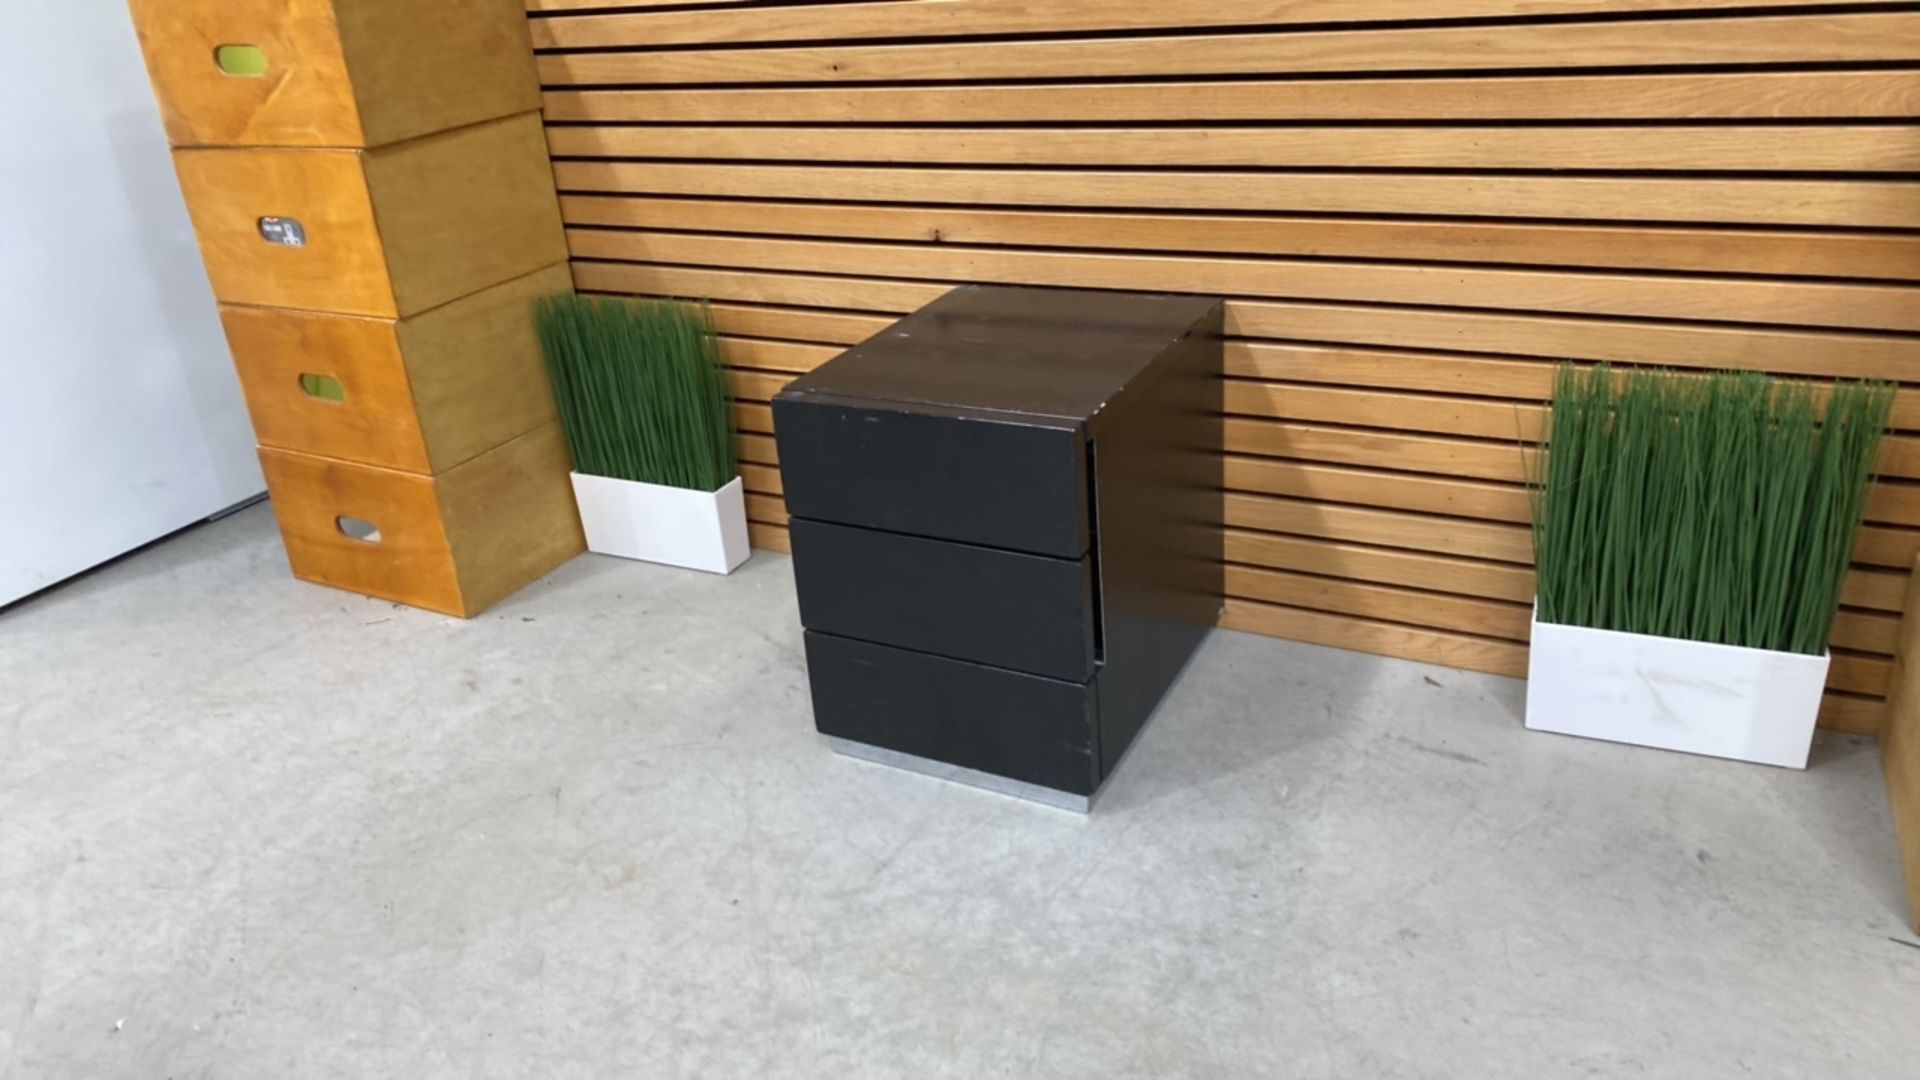 Black Wooden Side Table With 2 Draws - Image 3 of 6